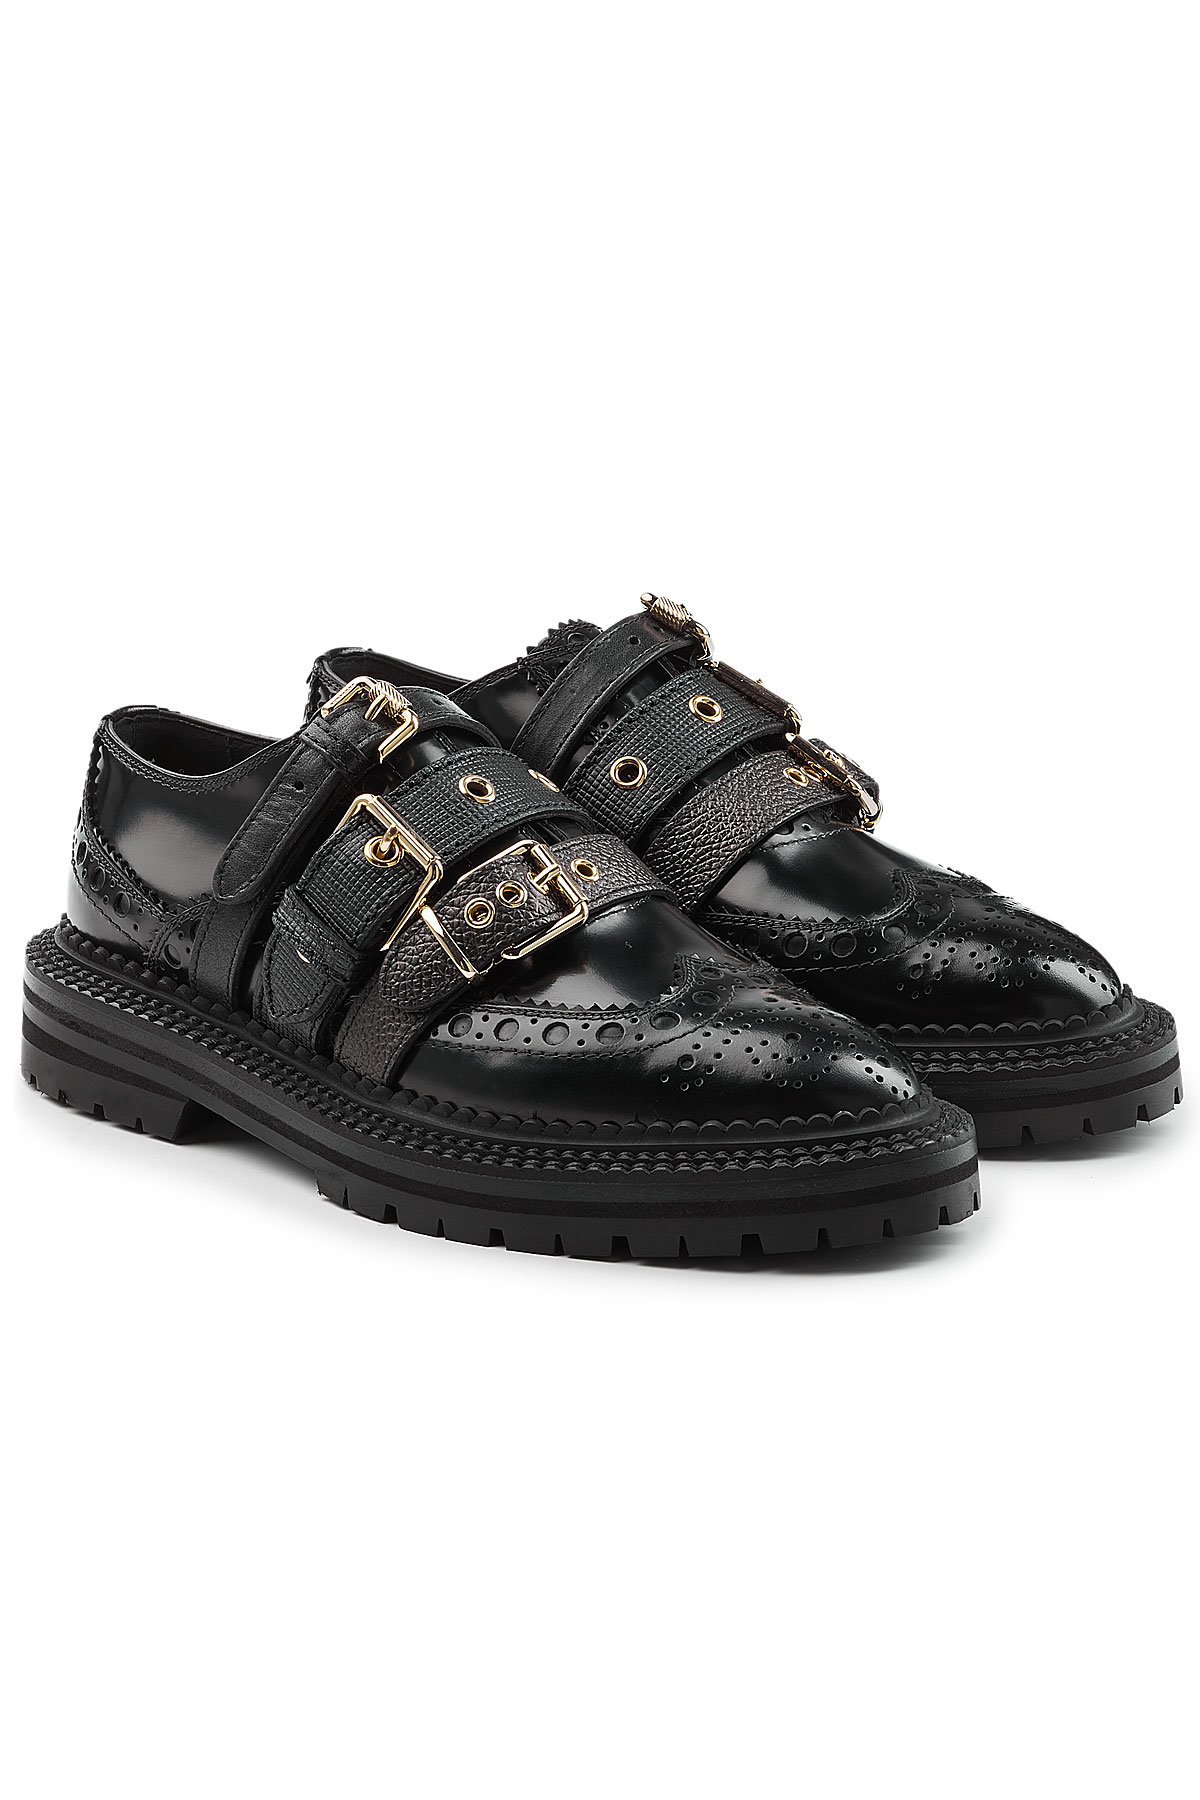 Burberry - Leather Brogues with Buckle Straps